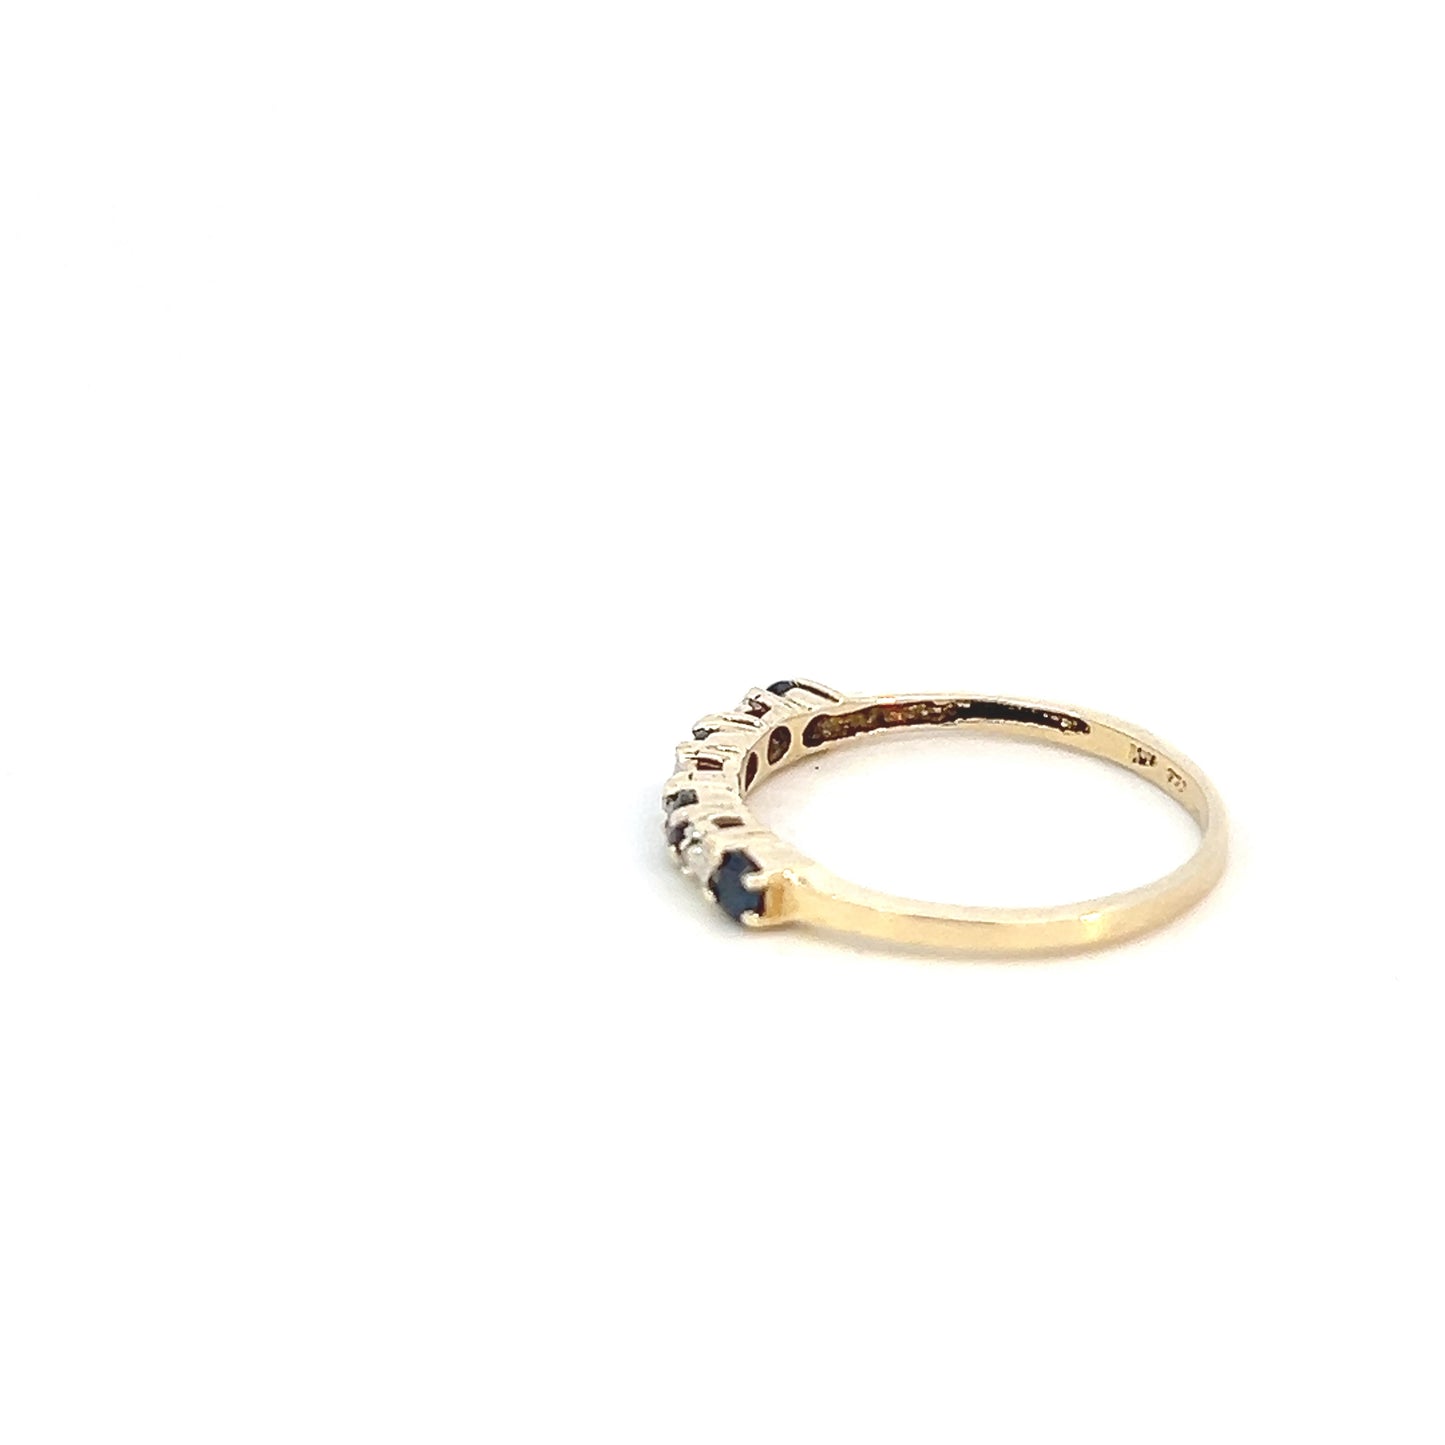 Blue Spinel Stone Ring - Stacking Ring - 10k - Yellow Gold - Size 7